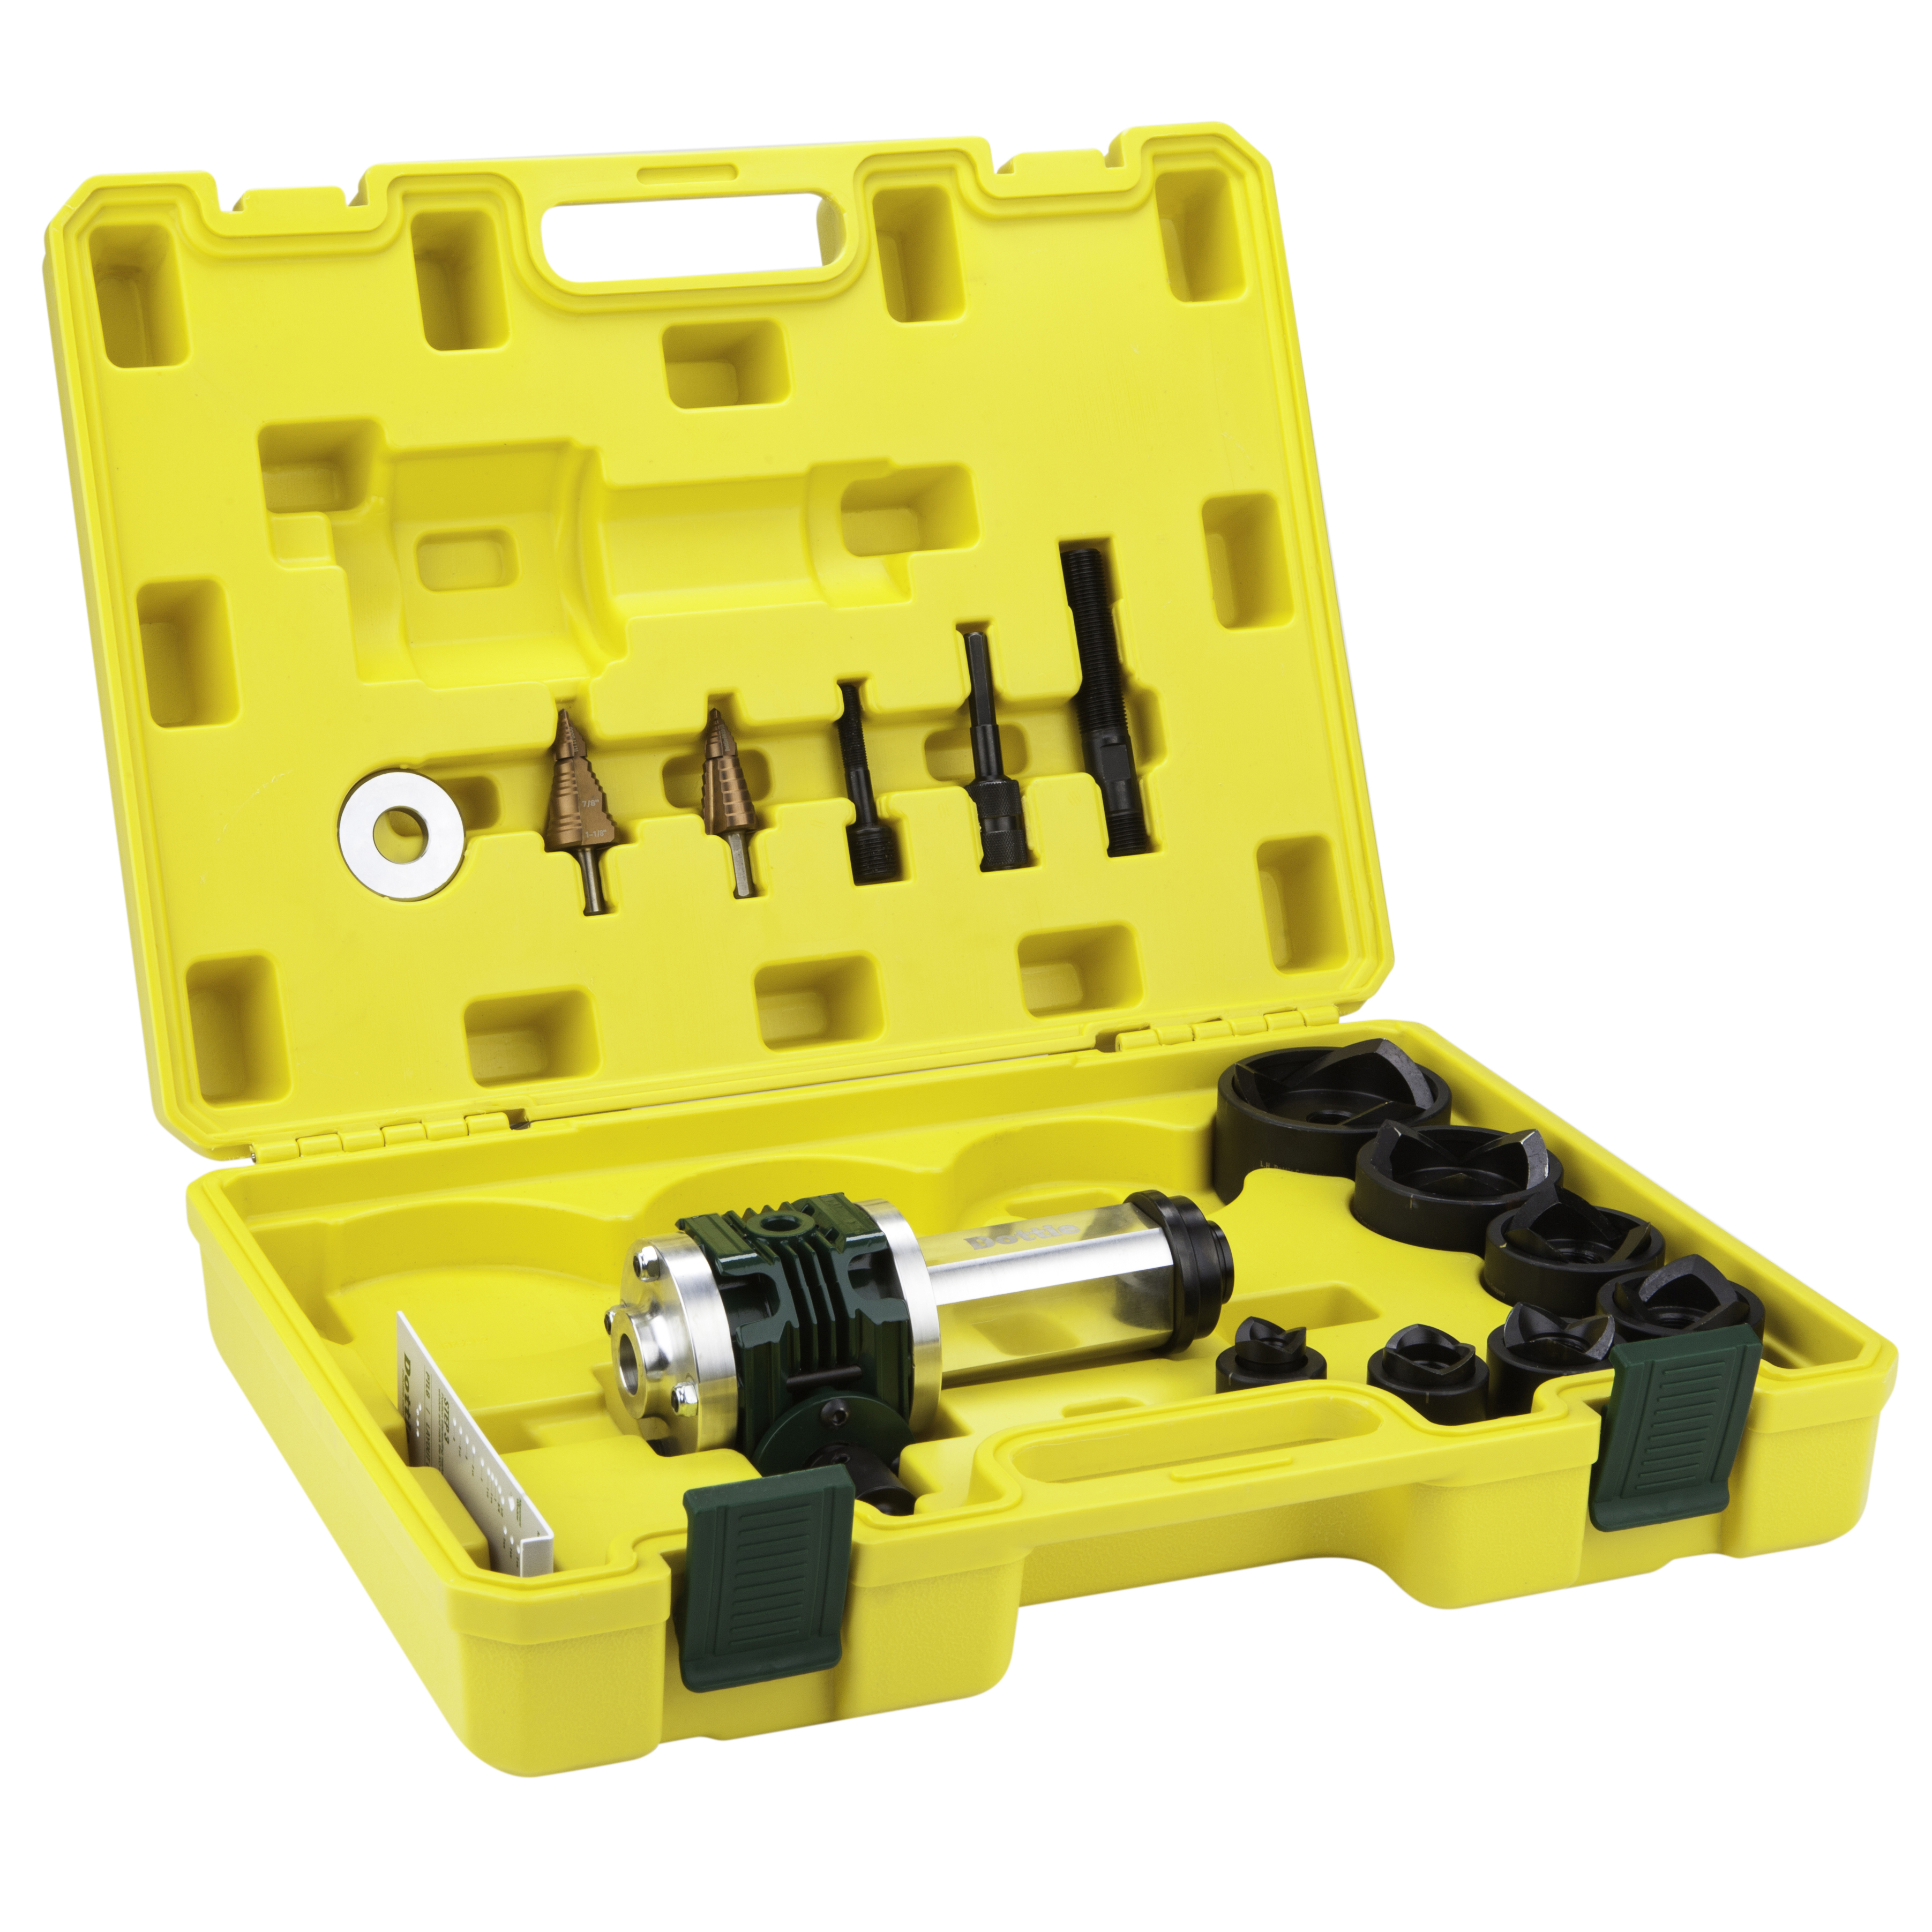 Gear Punch Tool Kit (16pcs set, includes case and gear punch)